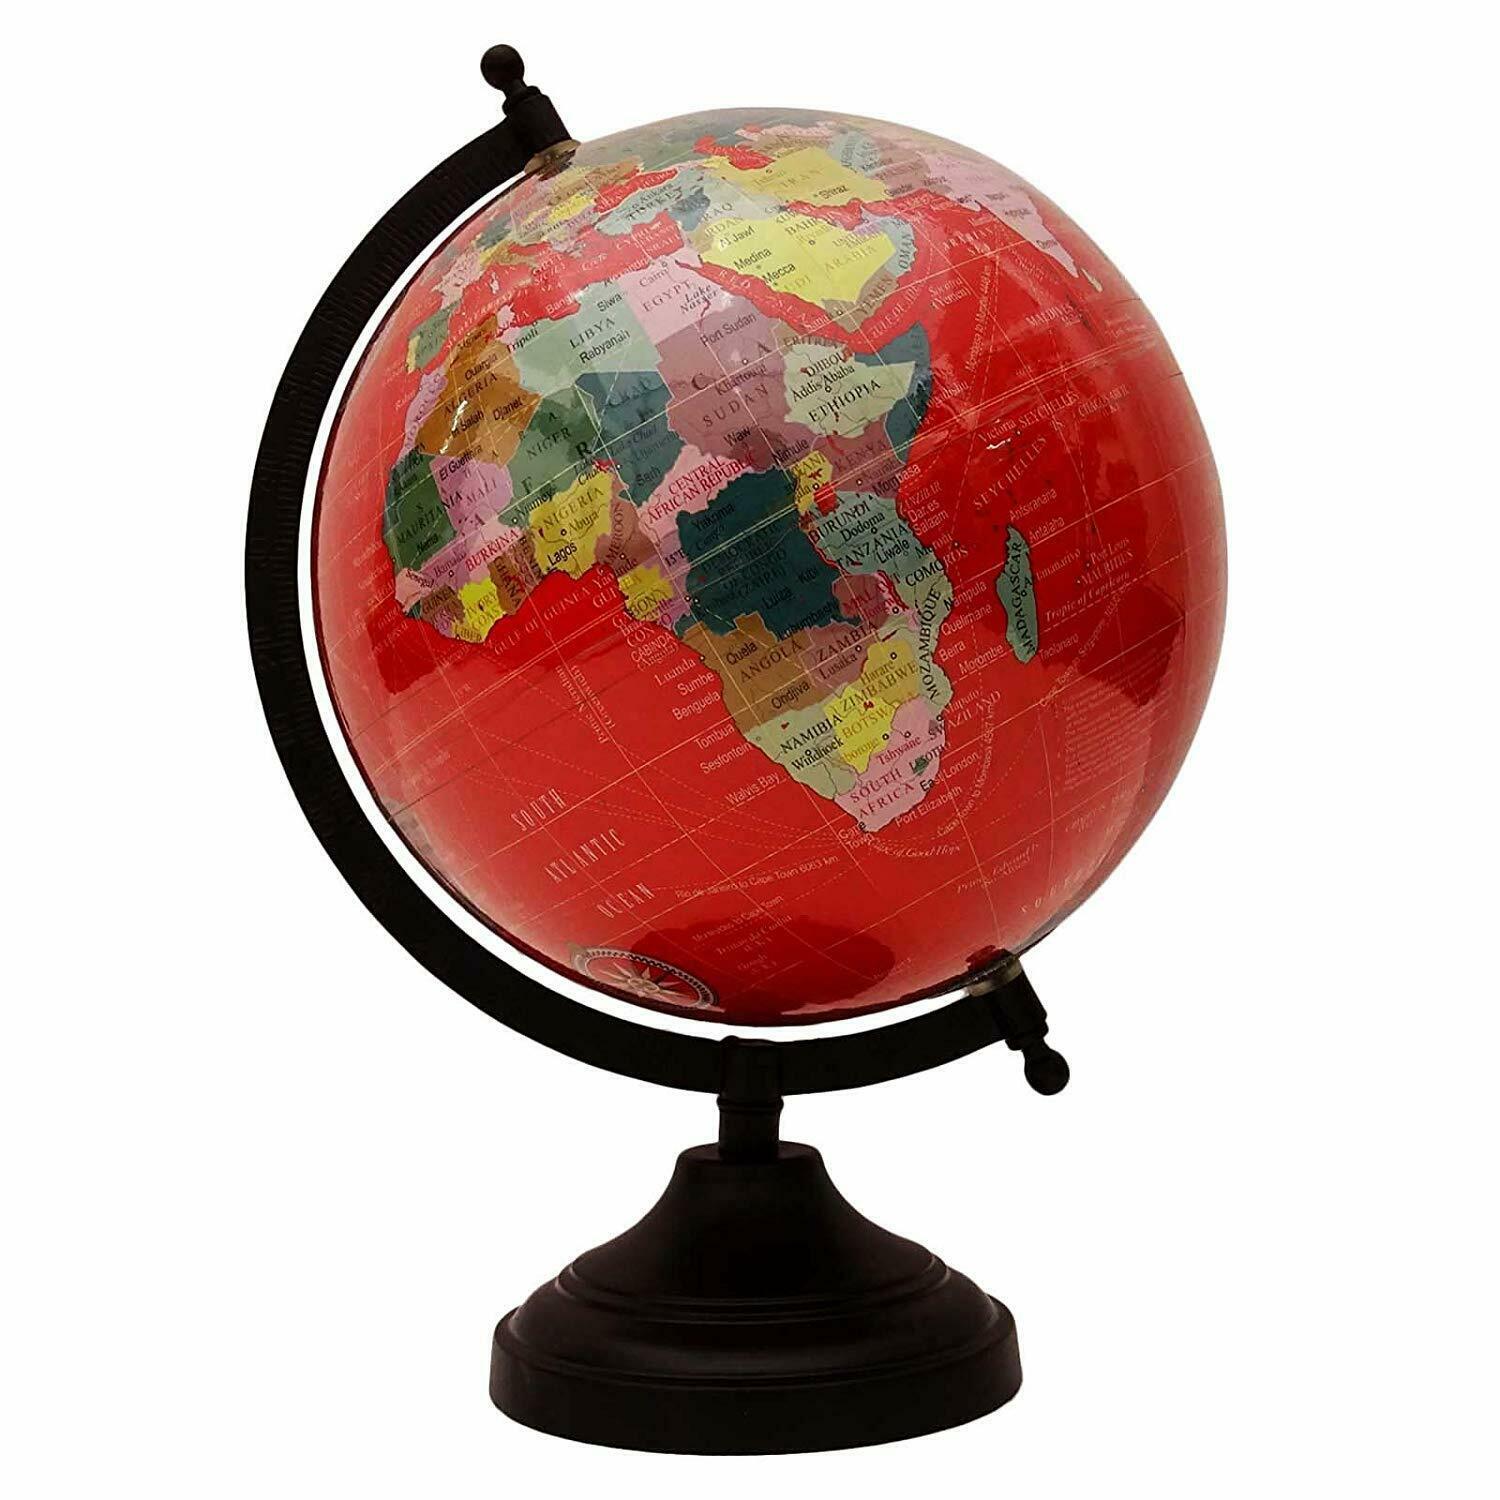 Primary image for Table Top World Globe Red Decorative Desk Decor Tabletop Display 8 Inch